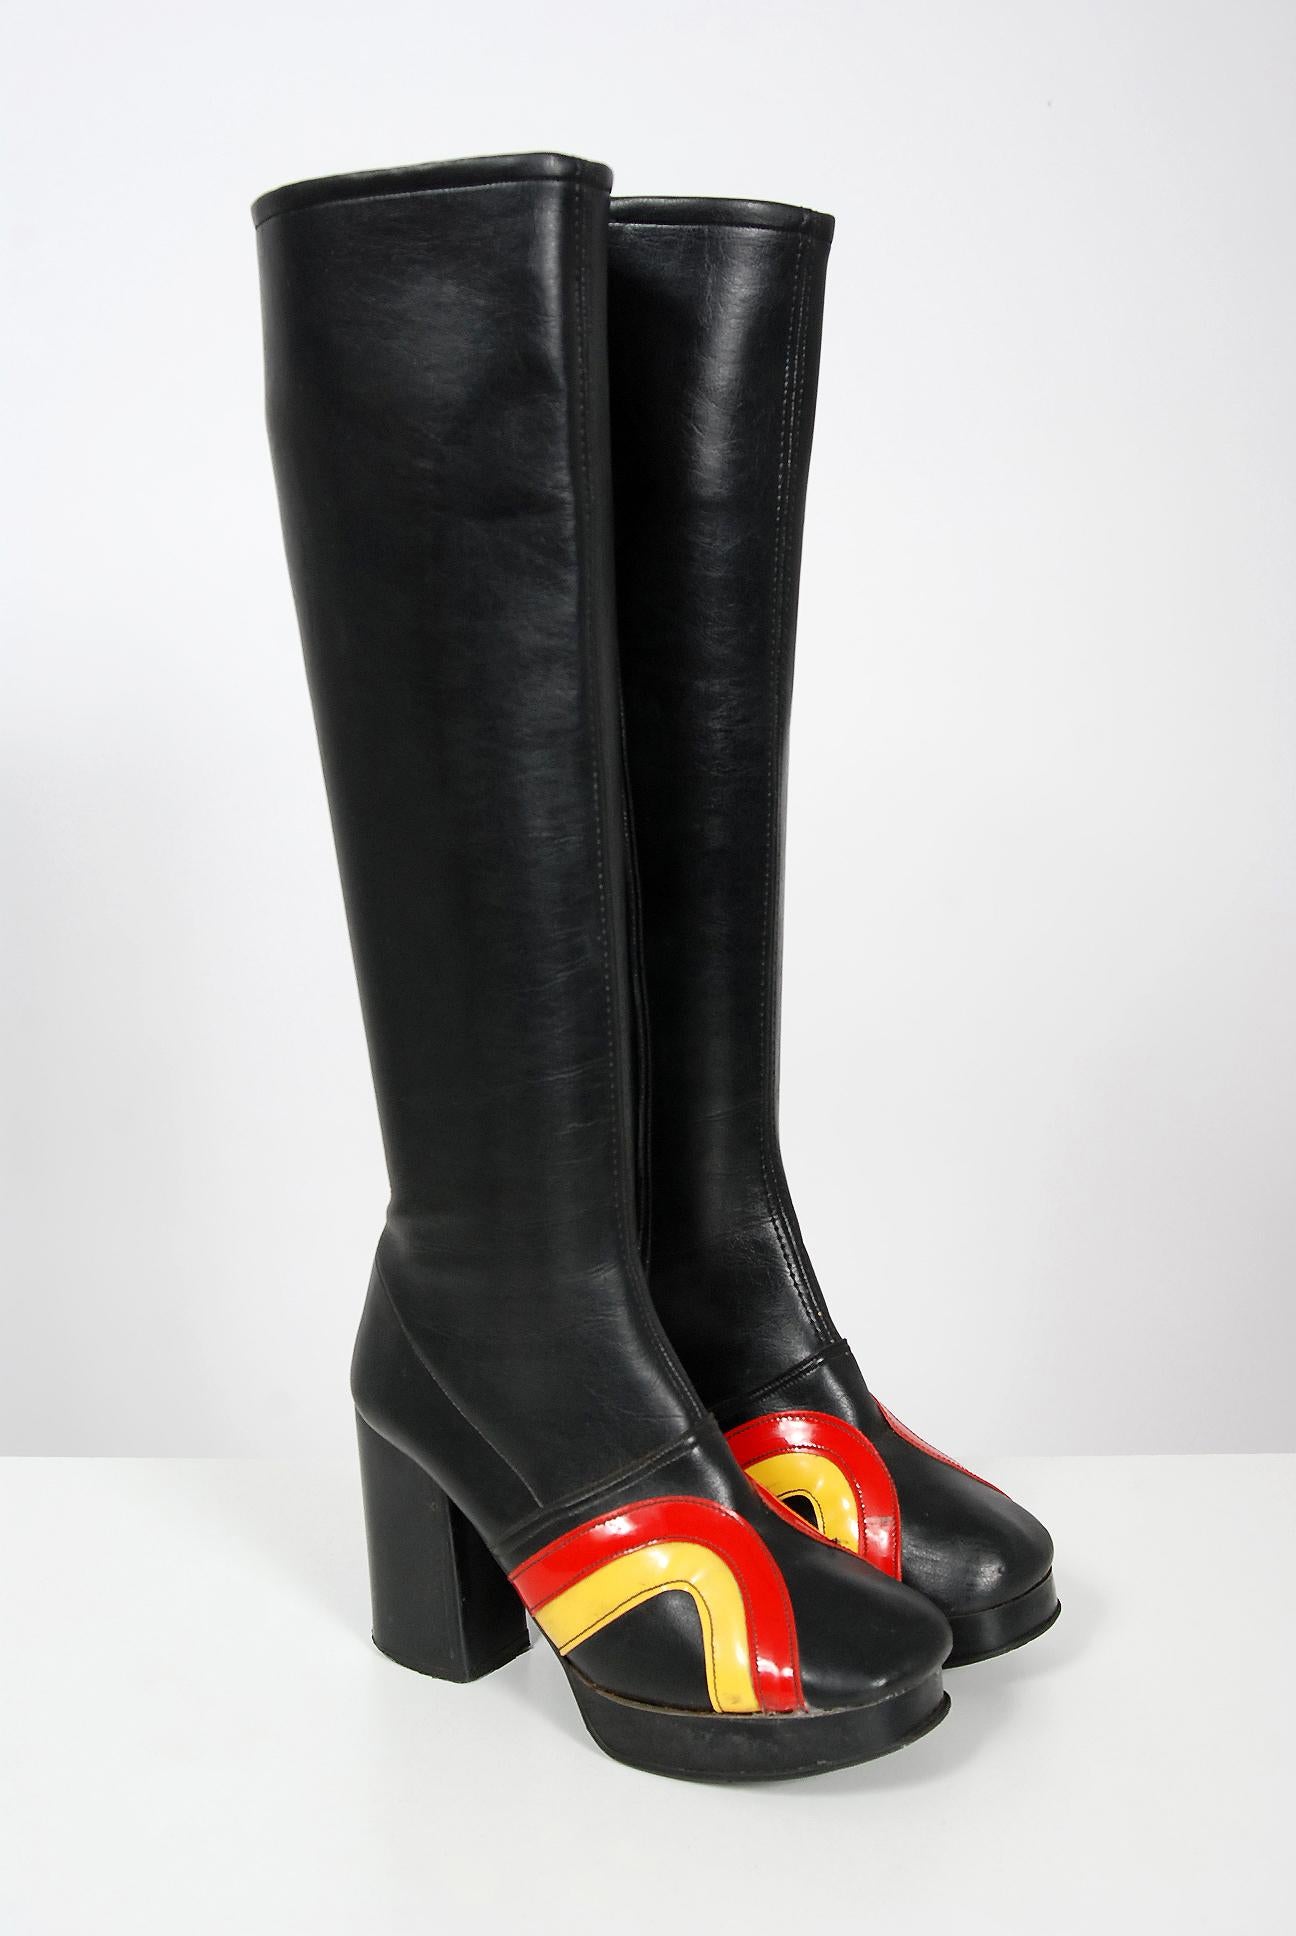 Amazing 1970's British glam rock black leather boots in the most incredible ruby-red and yellow bold vinyl stripe design. These boots have an inch stacked wooden base platform with a high three inch heel. I love the seductive knee-high design. Glam